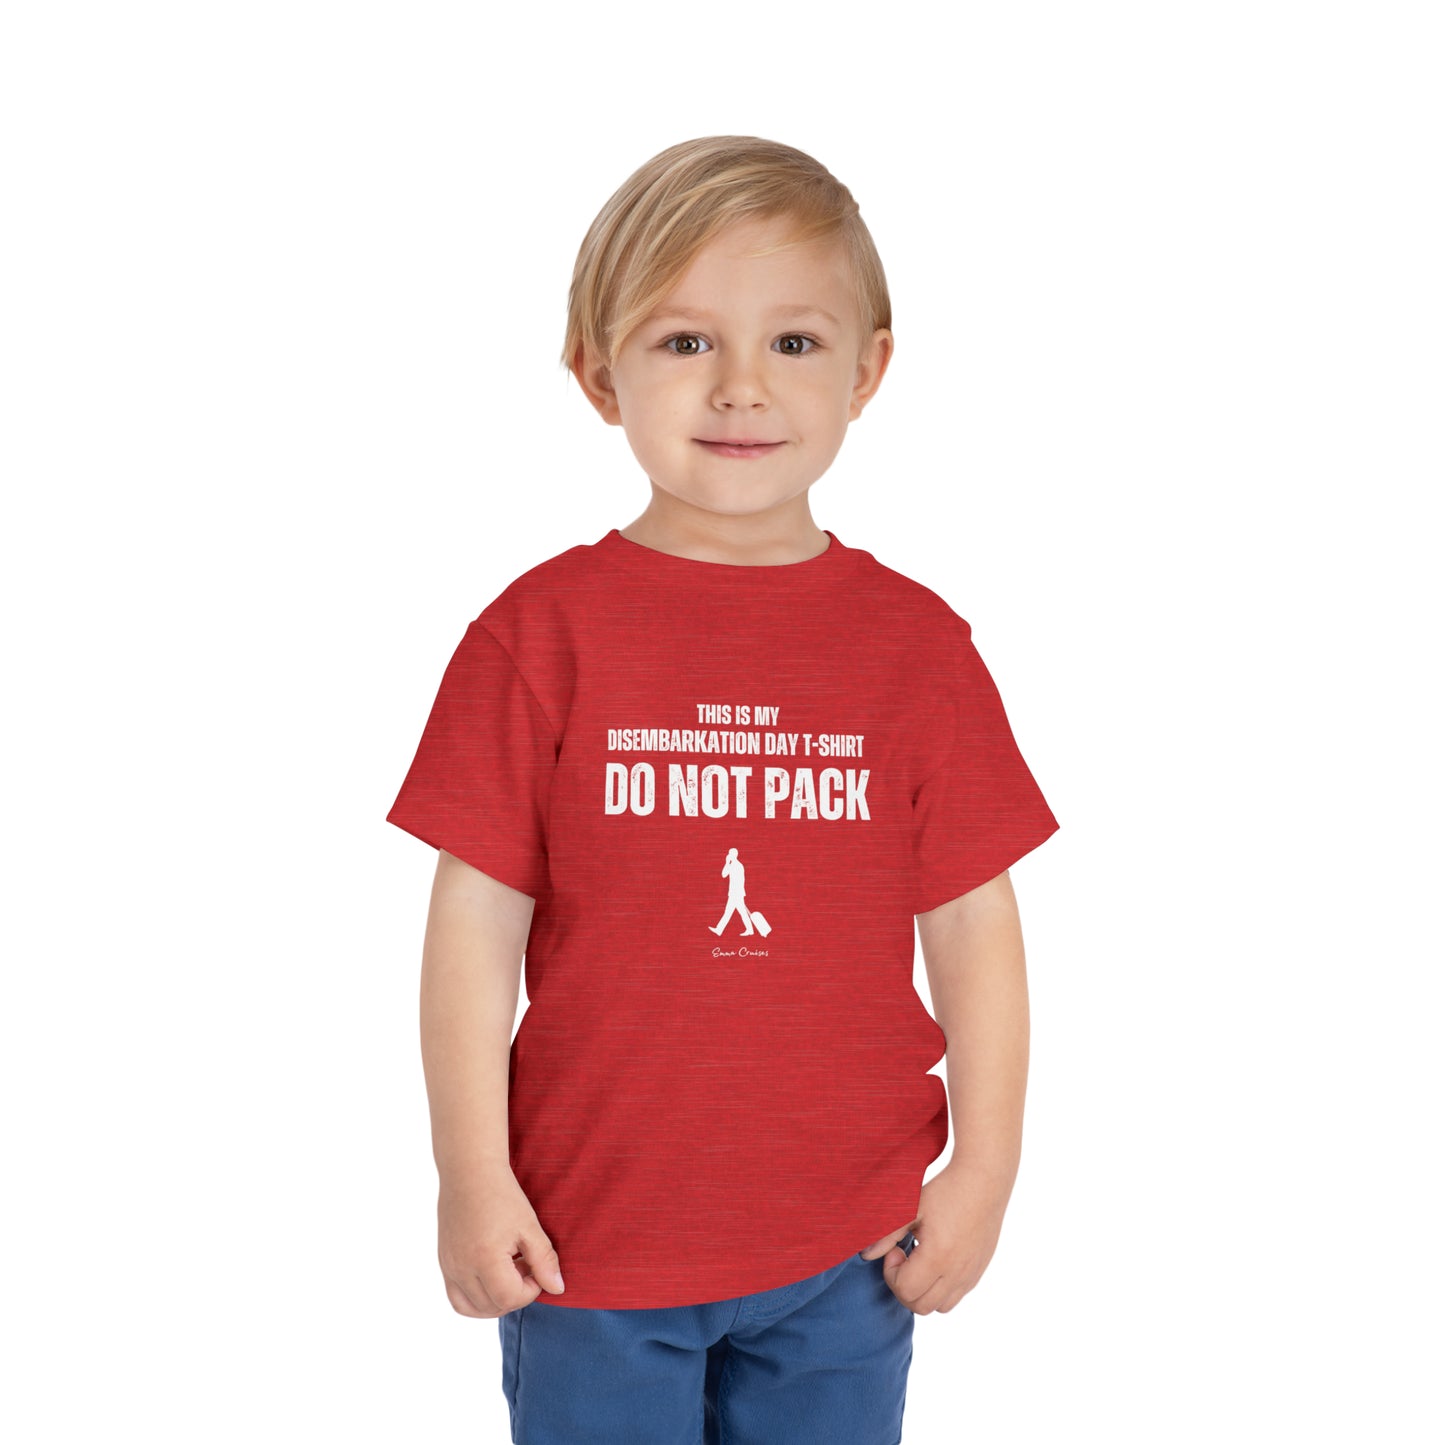 This is My Disembarkation Day T-Shirt - Toddler UNISEX T-Shirt